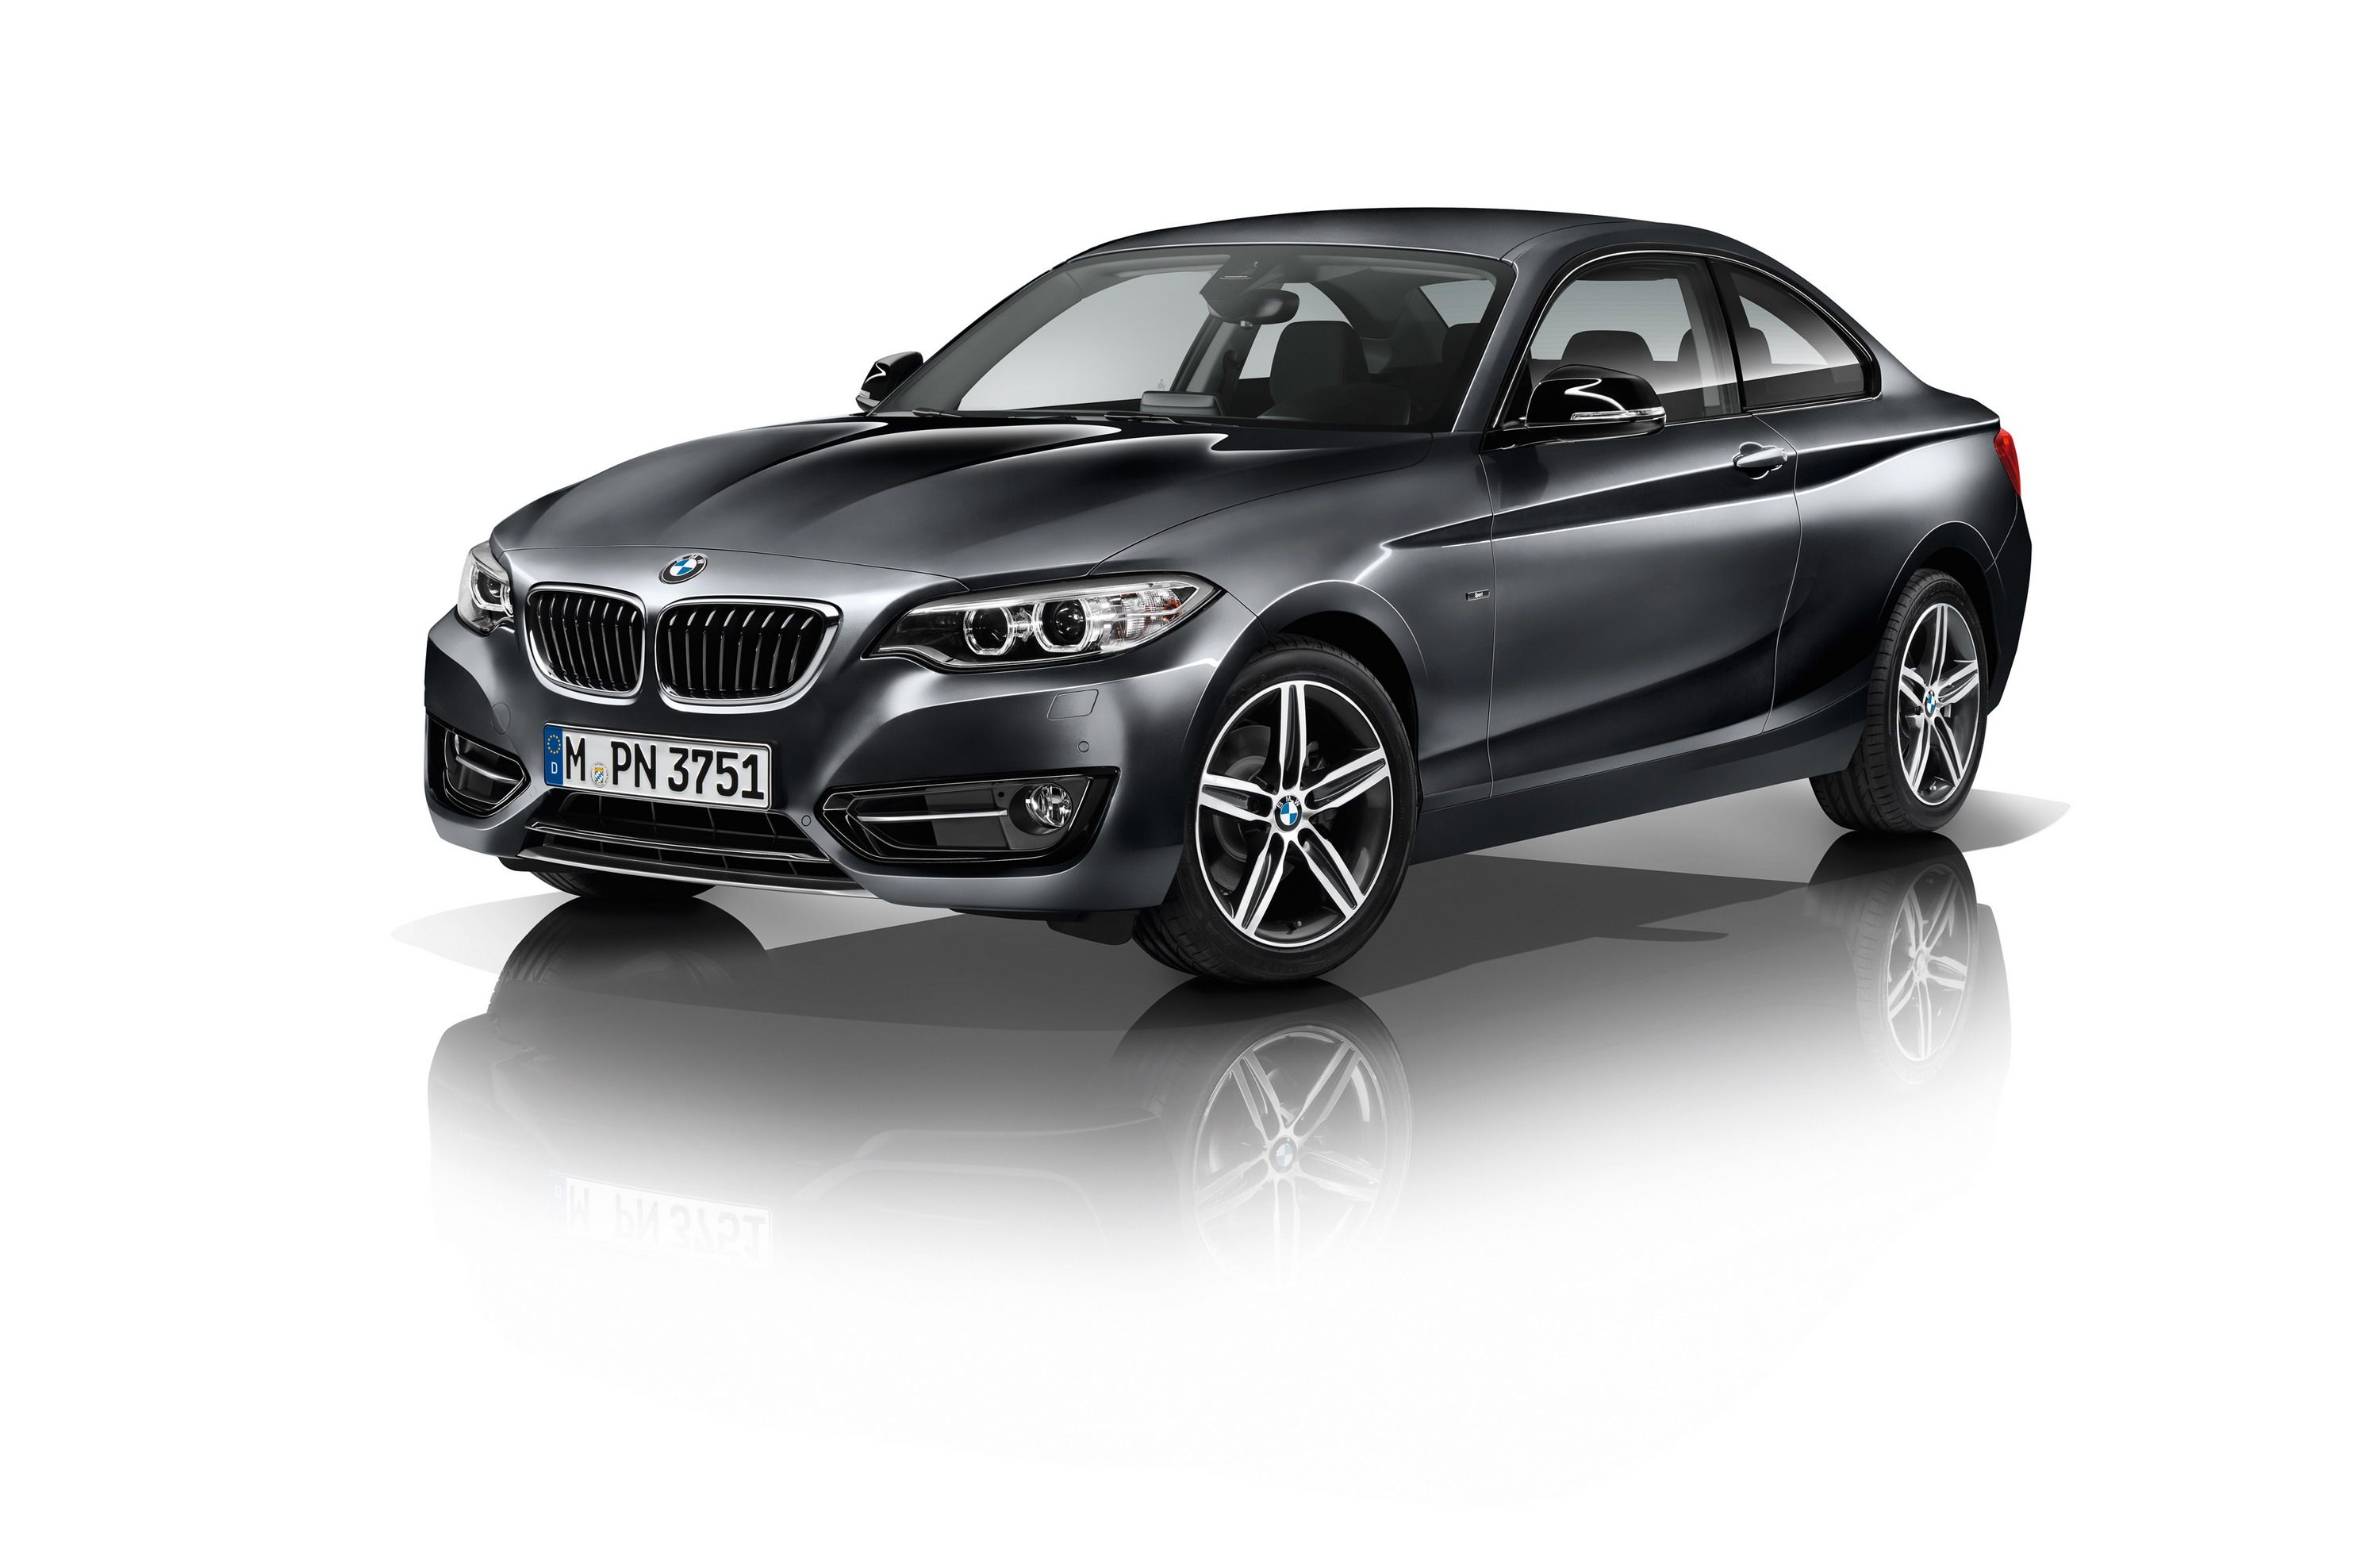 2015 BMW 228i Coupe with Track Handling Package